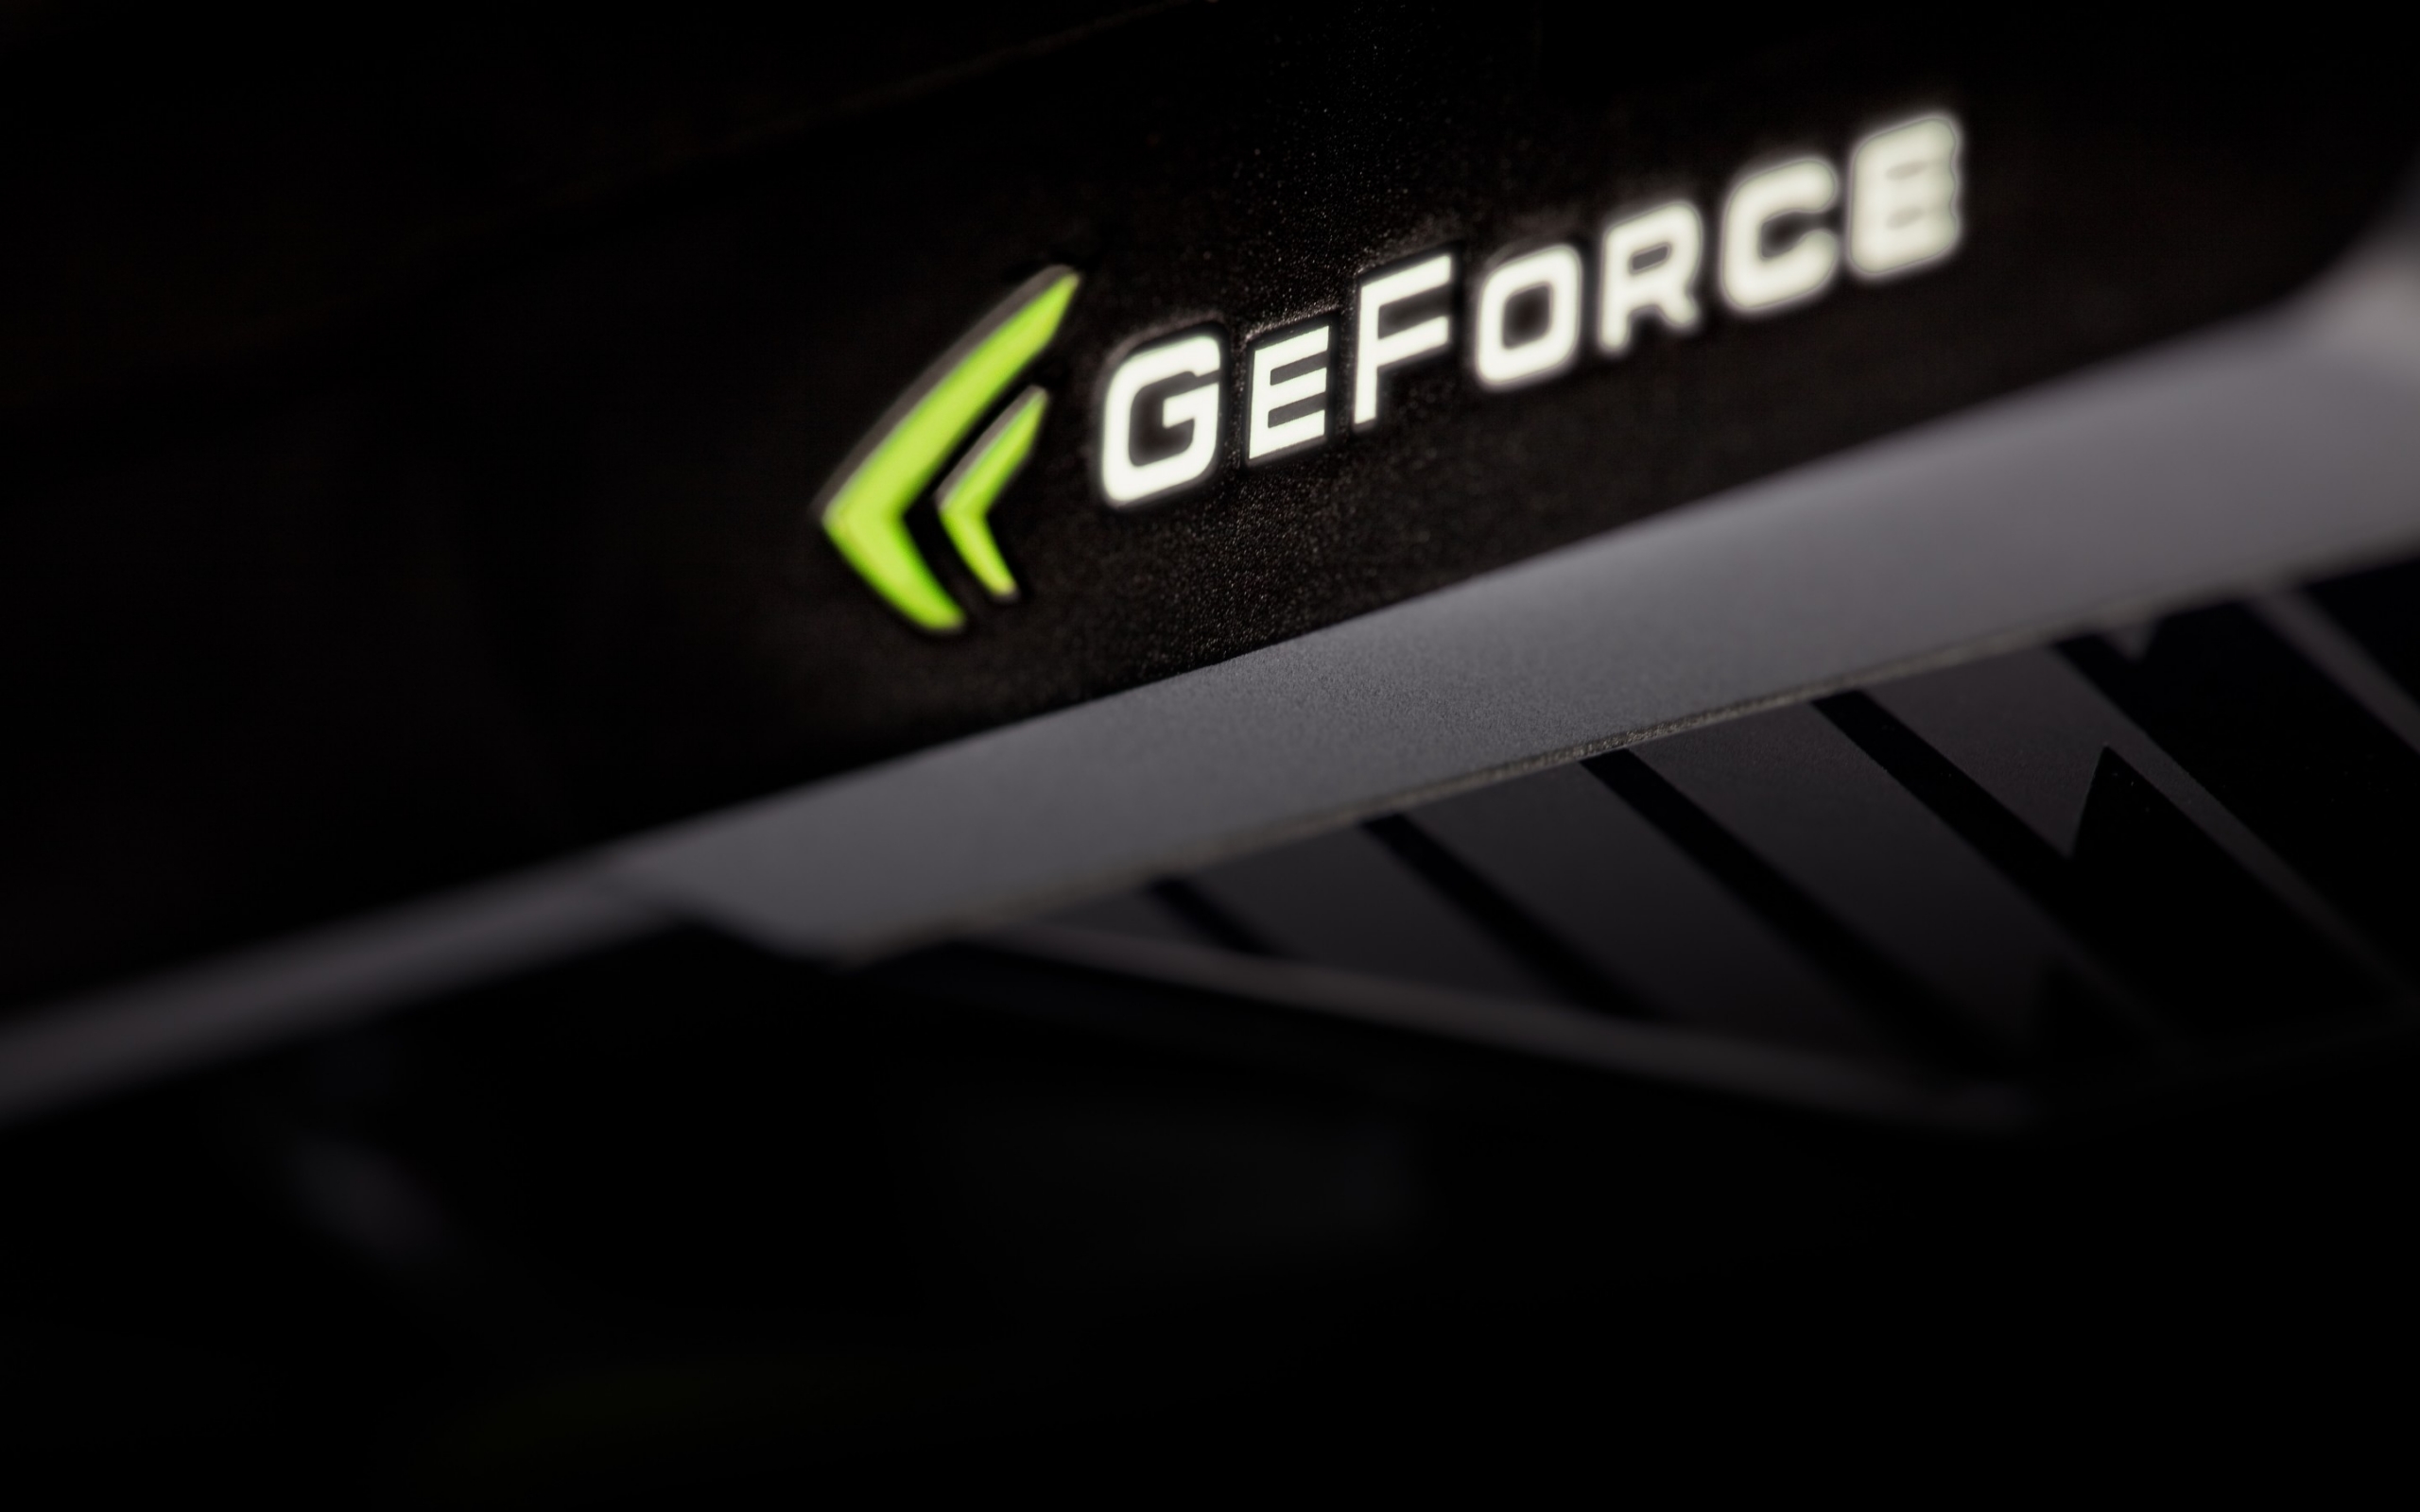 GeForce Graphics for 2560 x 1600 widescreen resolution